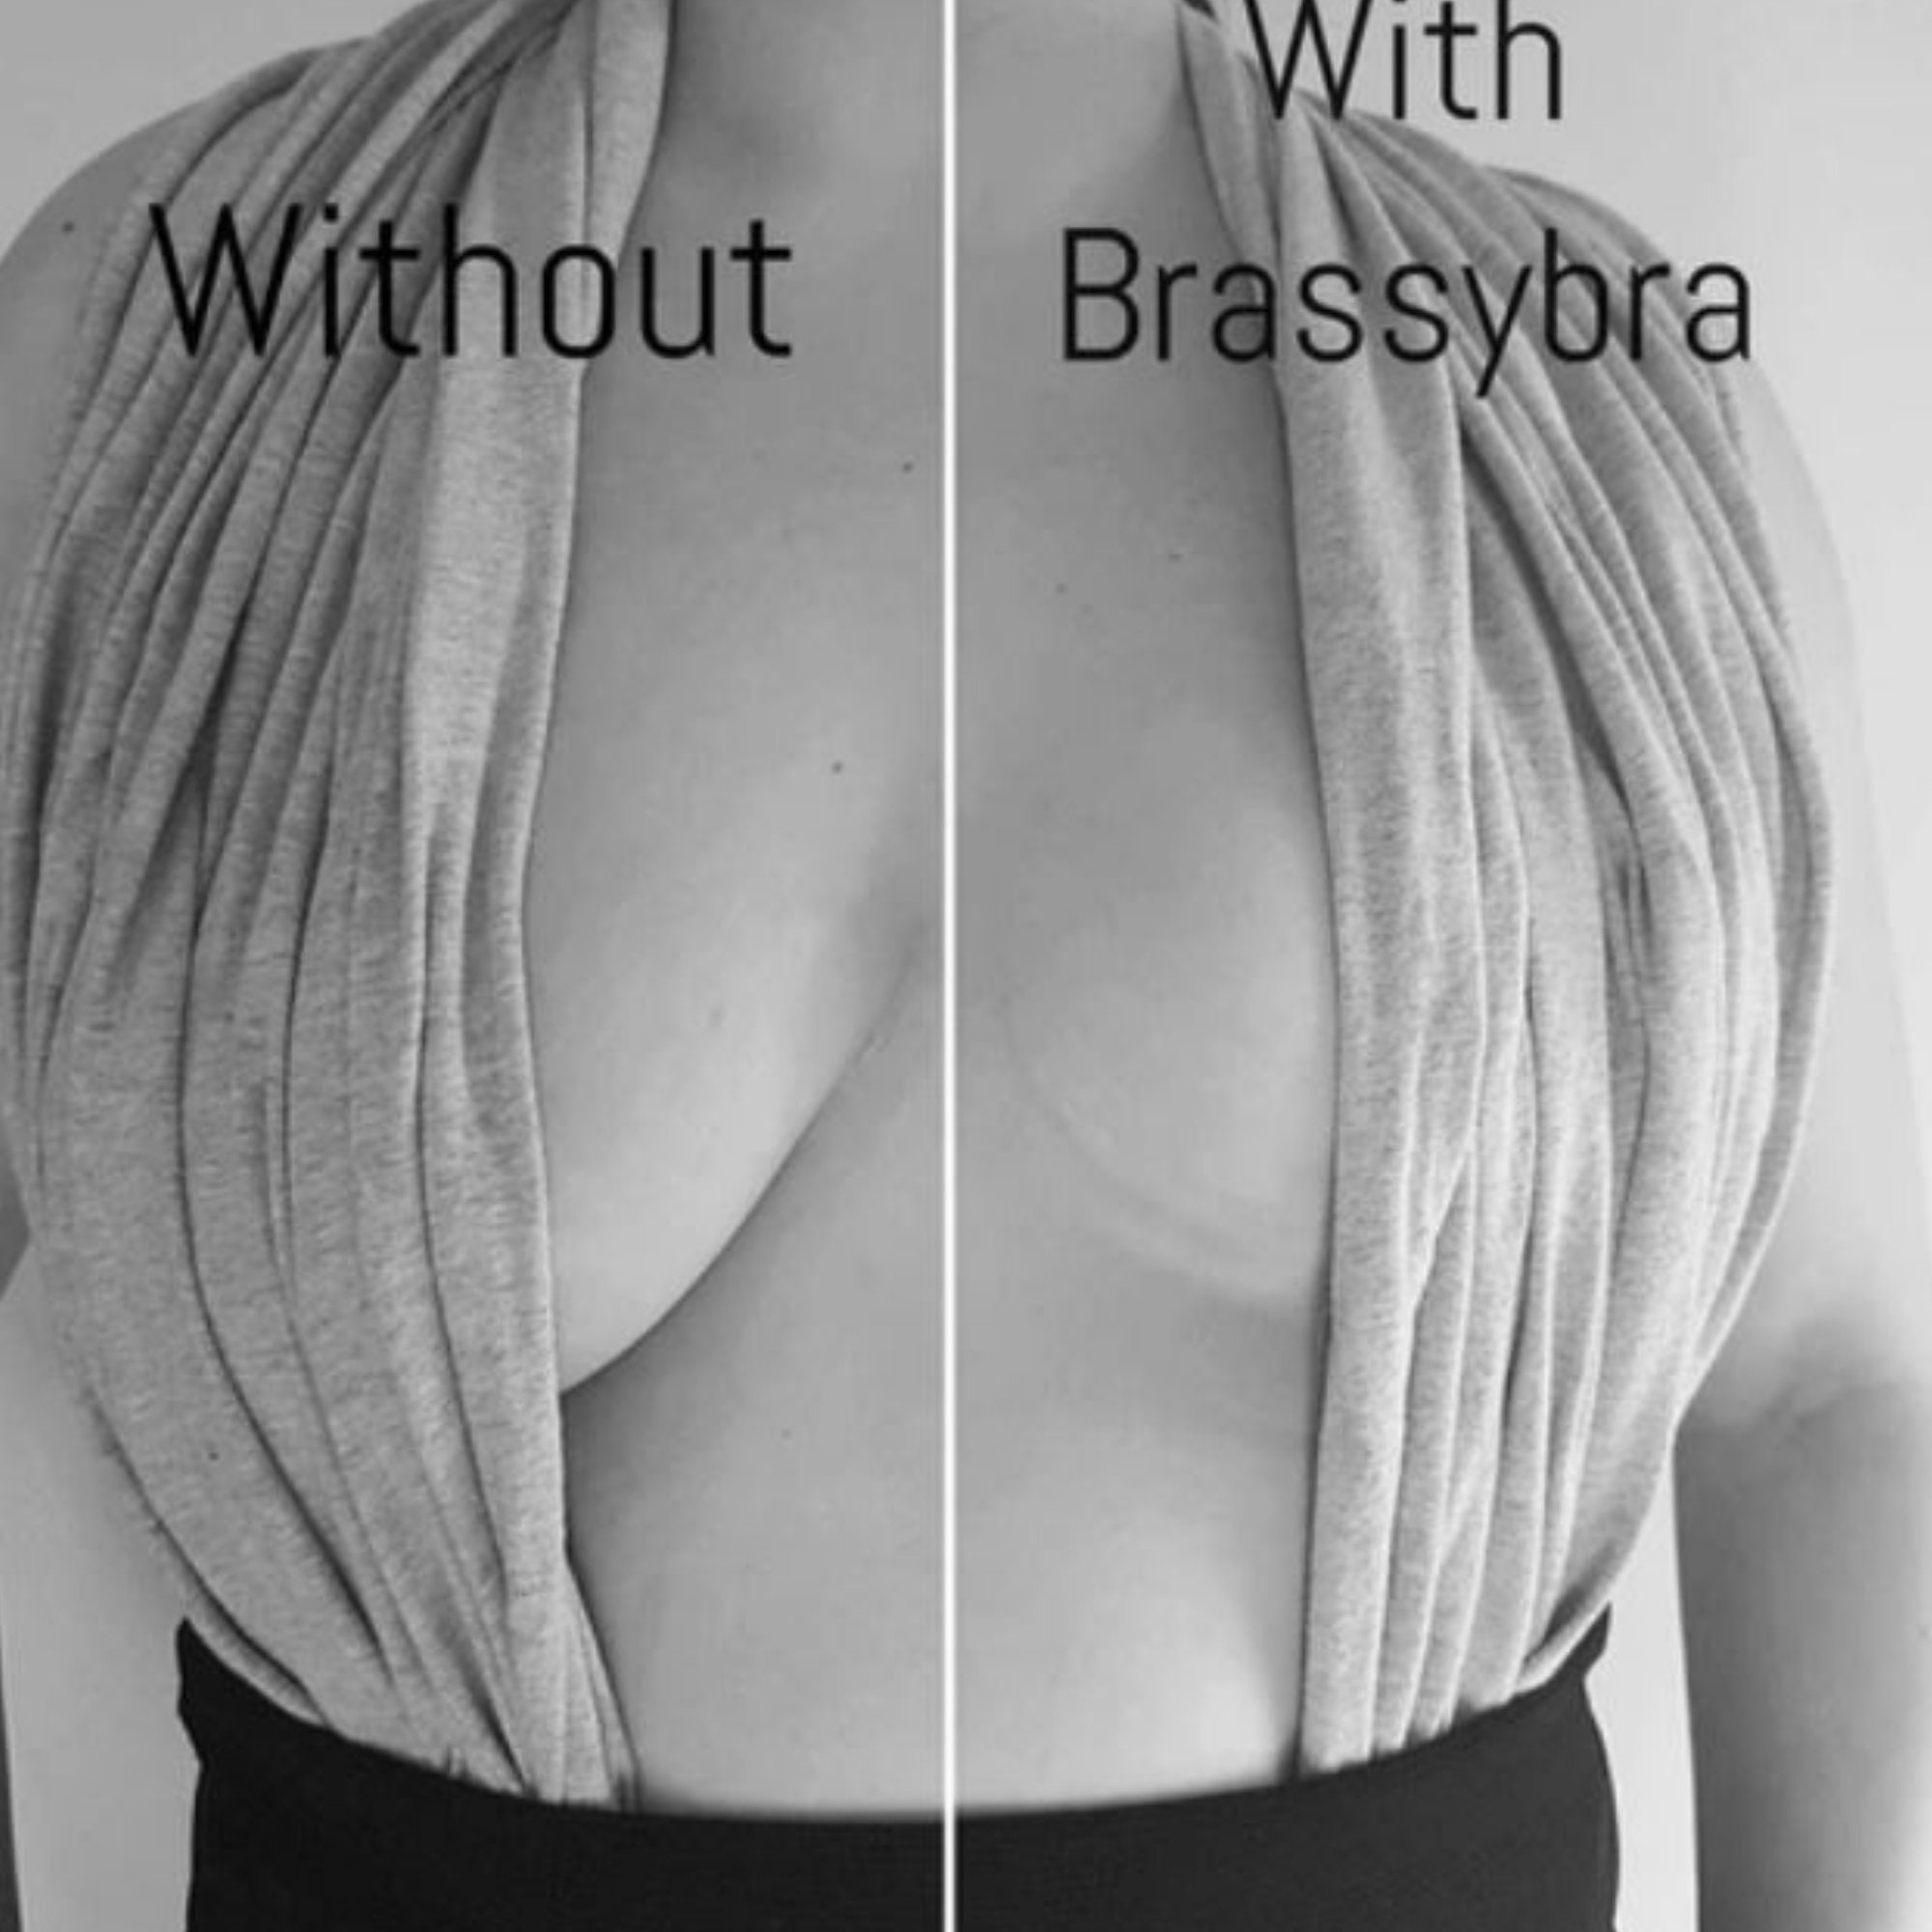 Women Invisible Brassy Tape Breast Lifter Lifting Bra Silicone -   Denmark